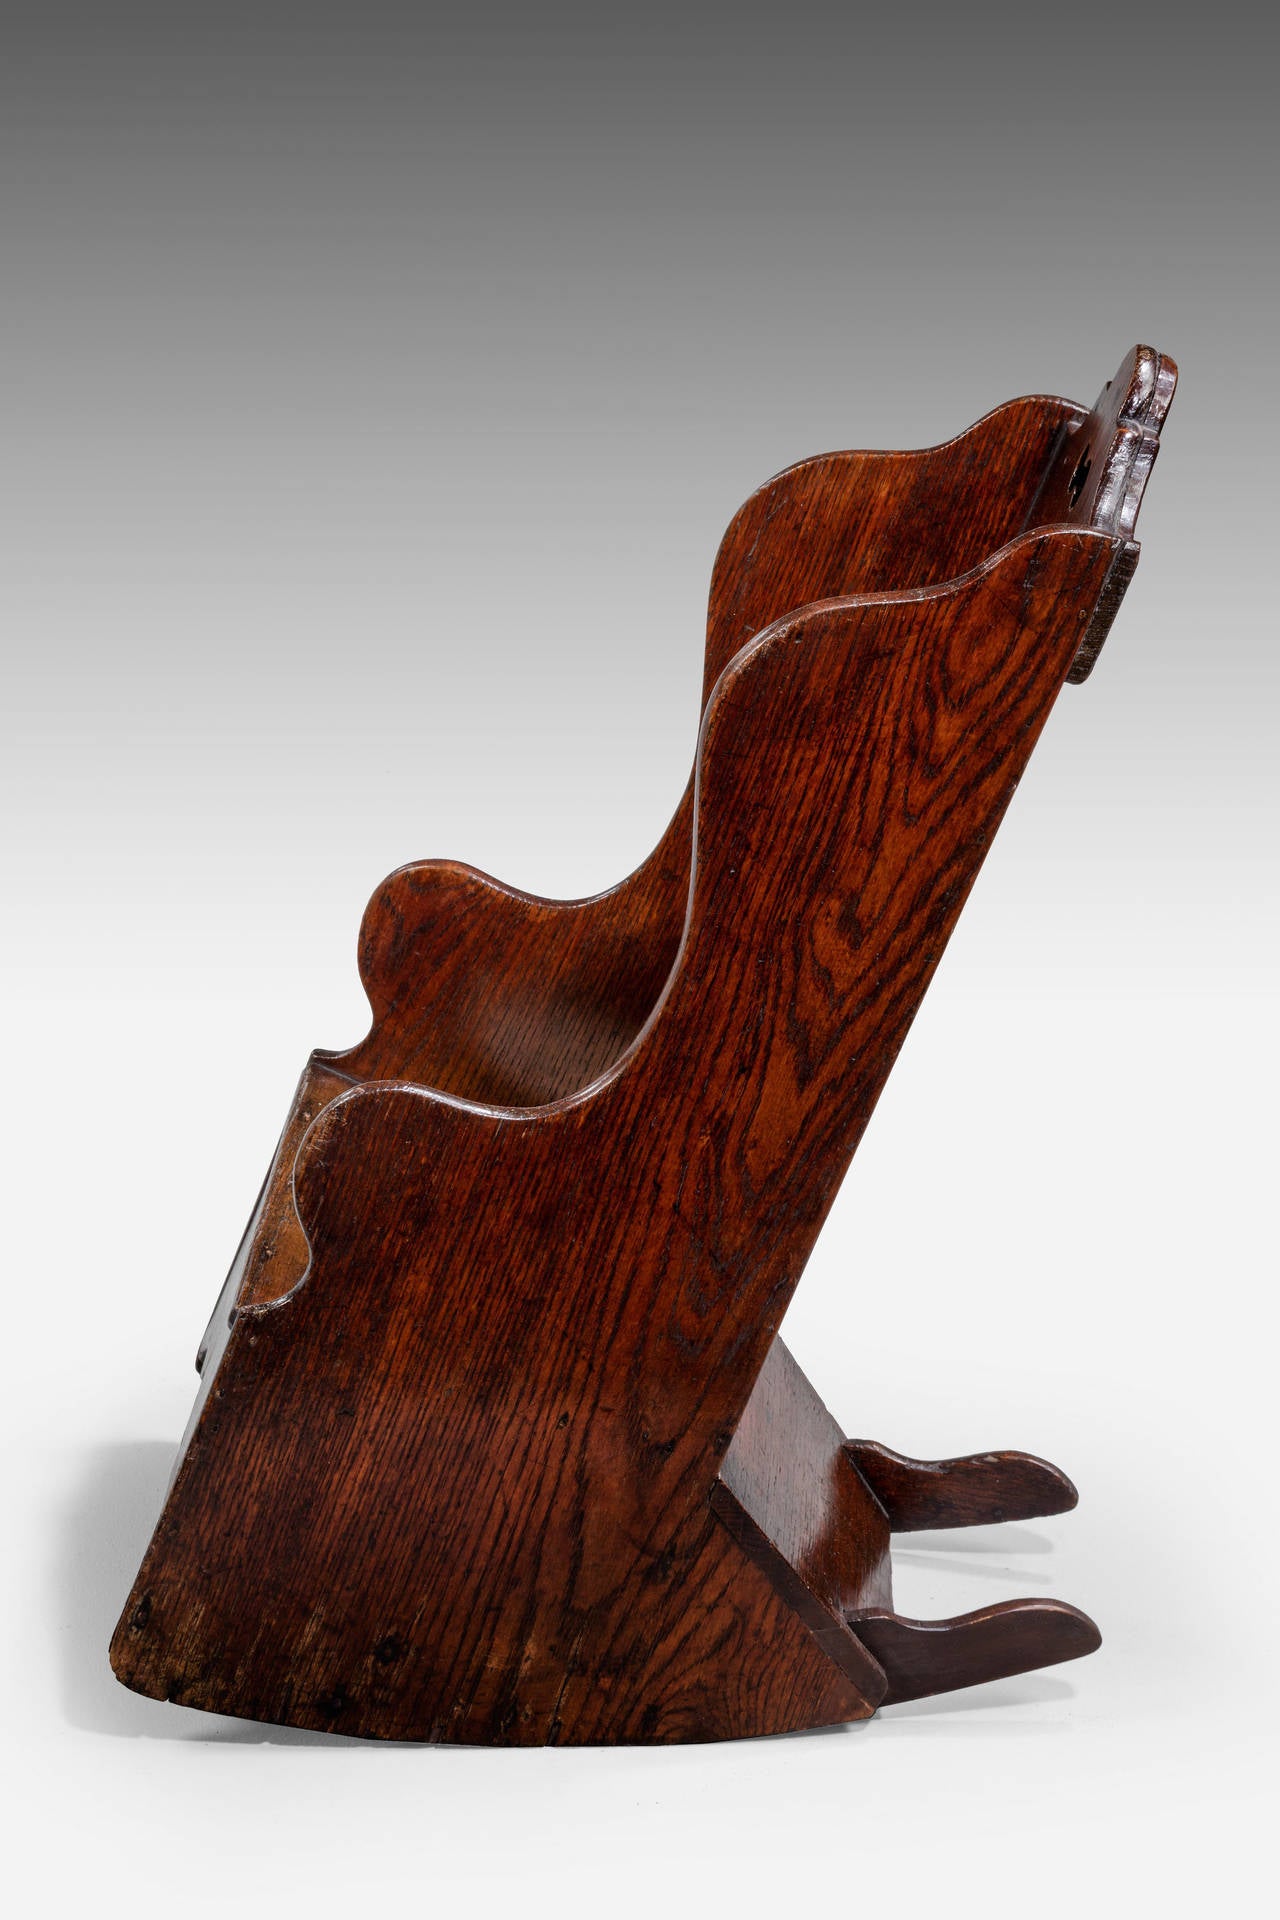 A charming oak child's rocking chair, incorporating period potty. Well figured timbers.

